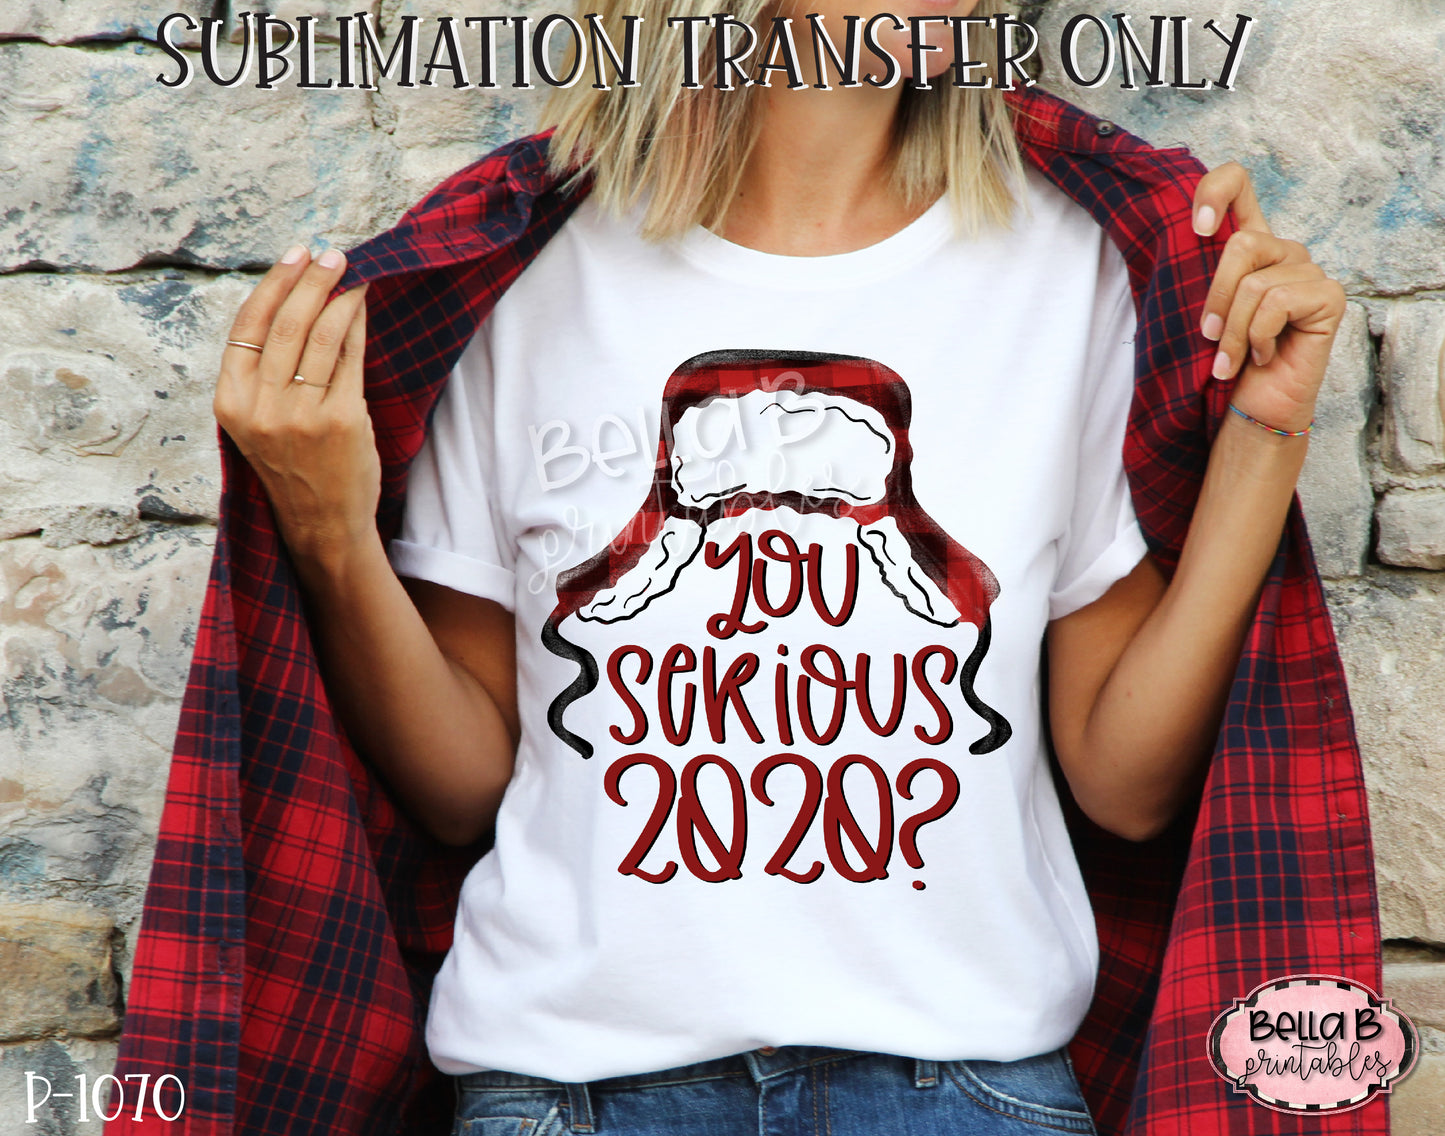 You Serious 2020? Sublimation Transfer, Ready To Press